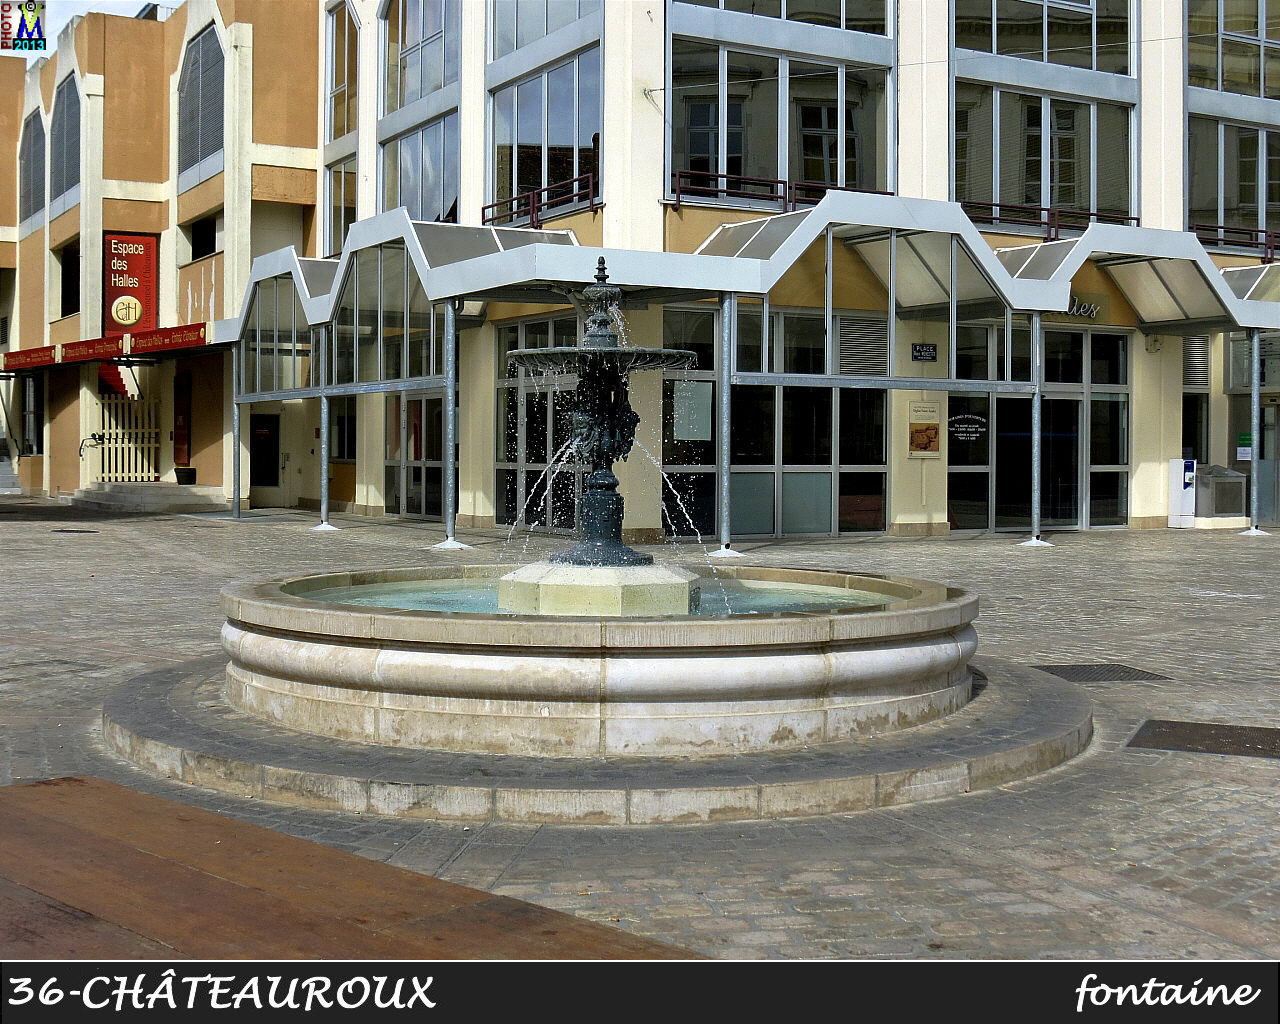 36CHATEAUROUX_fontaine_100.jpg